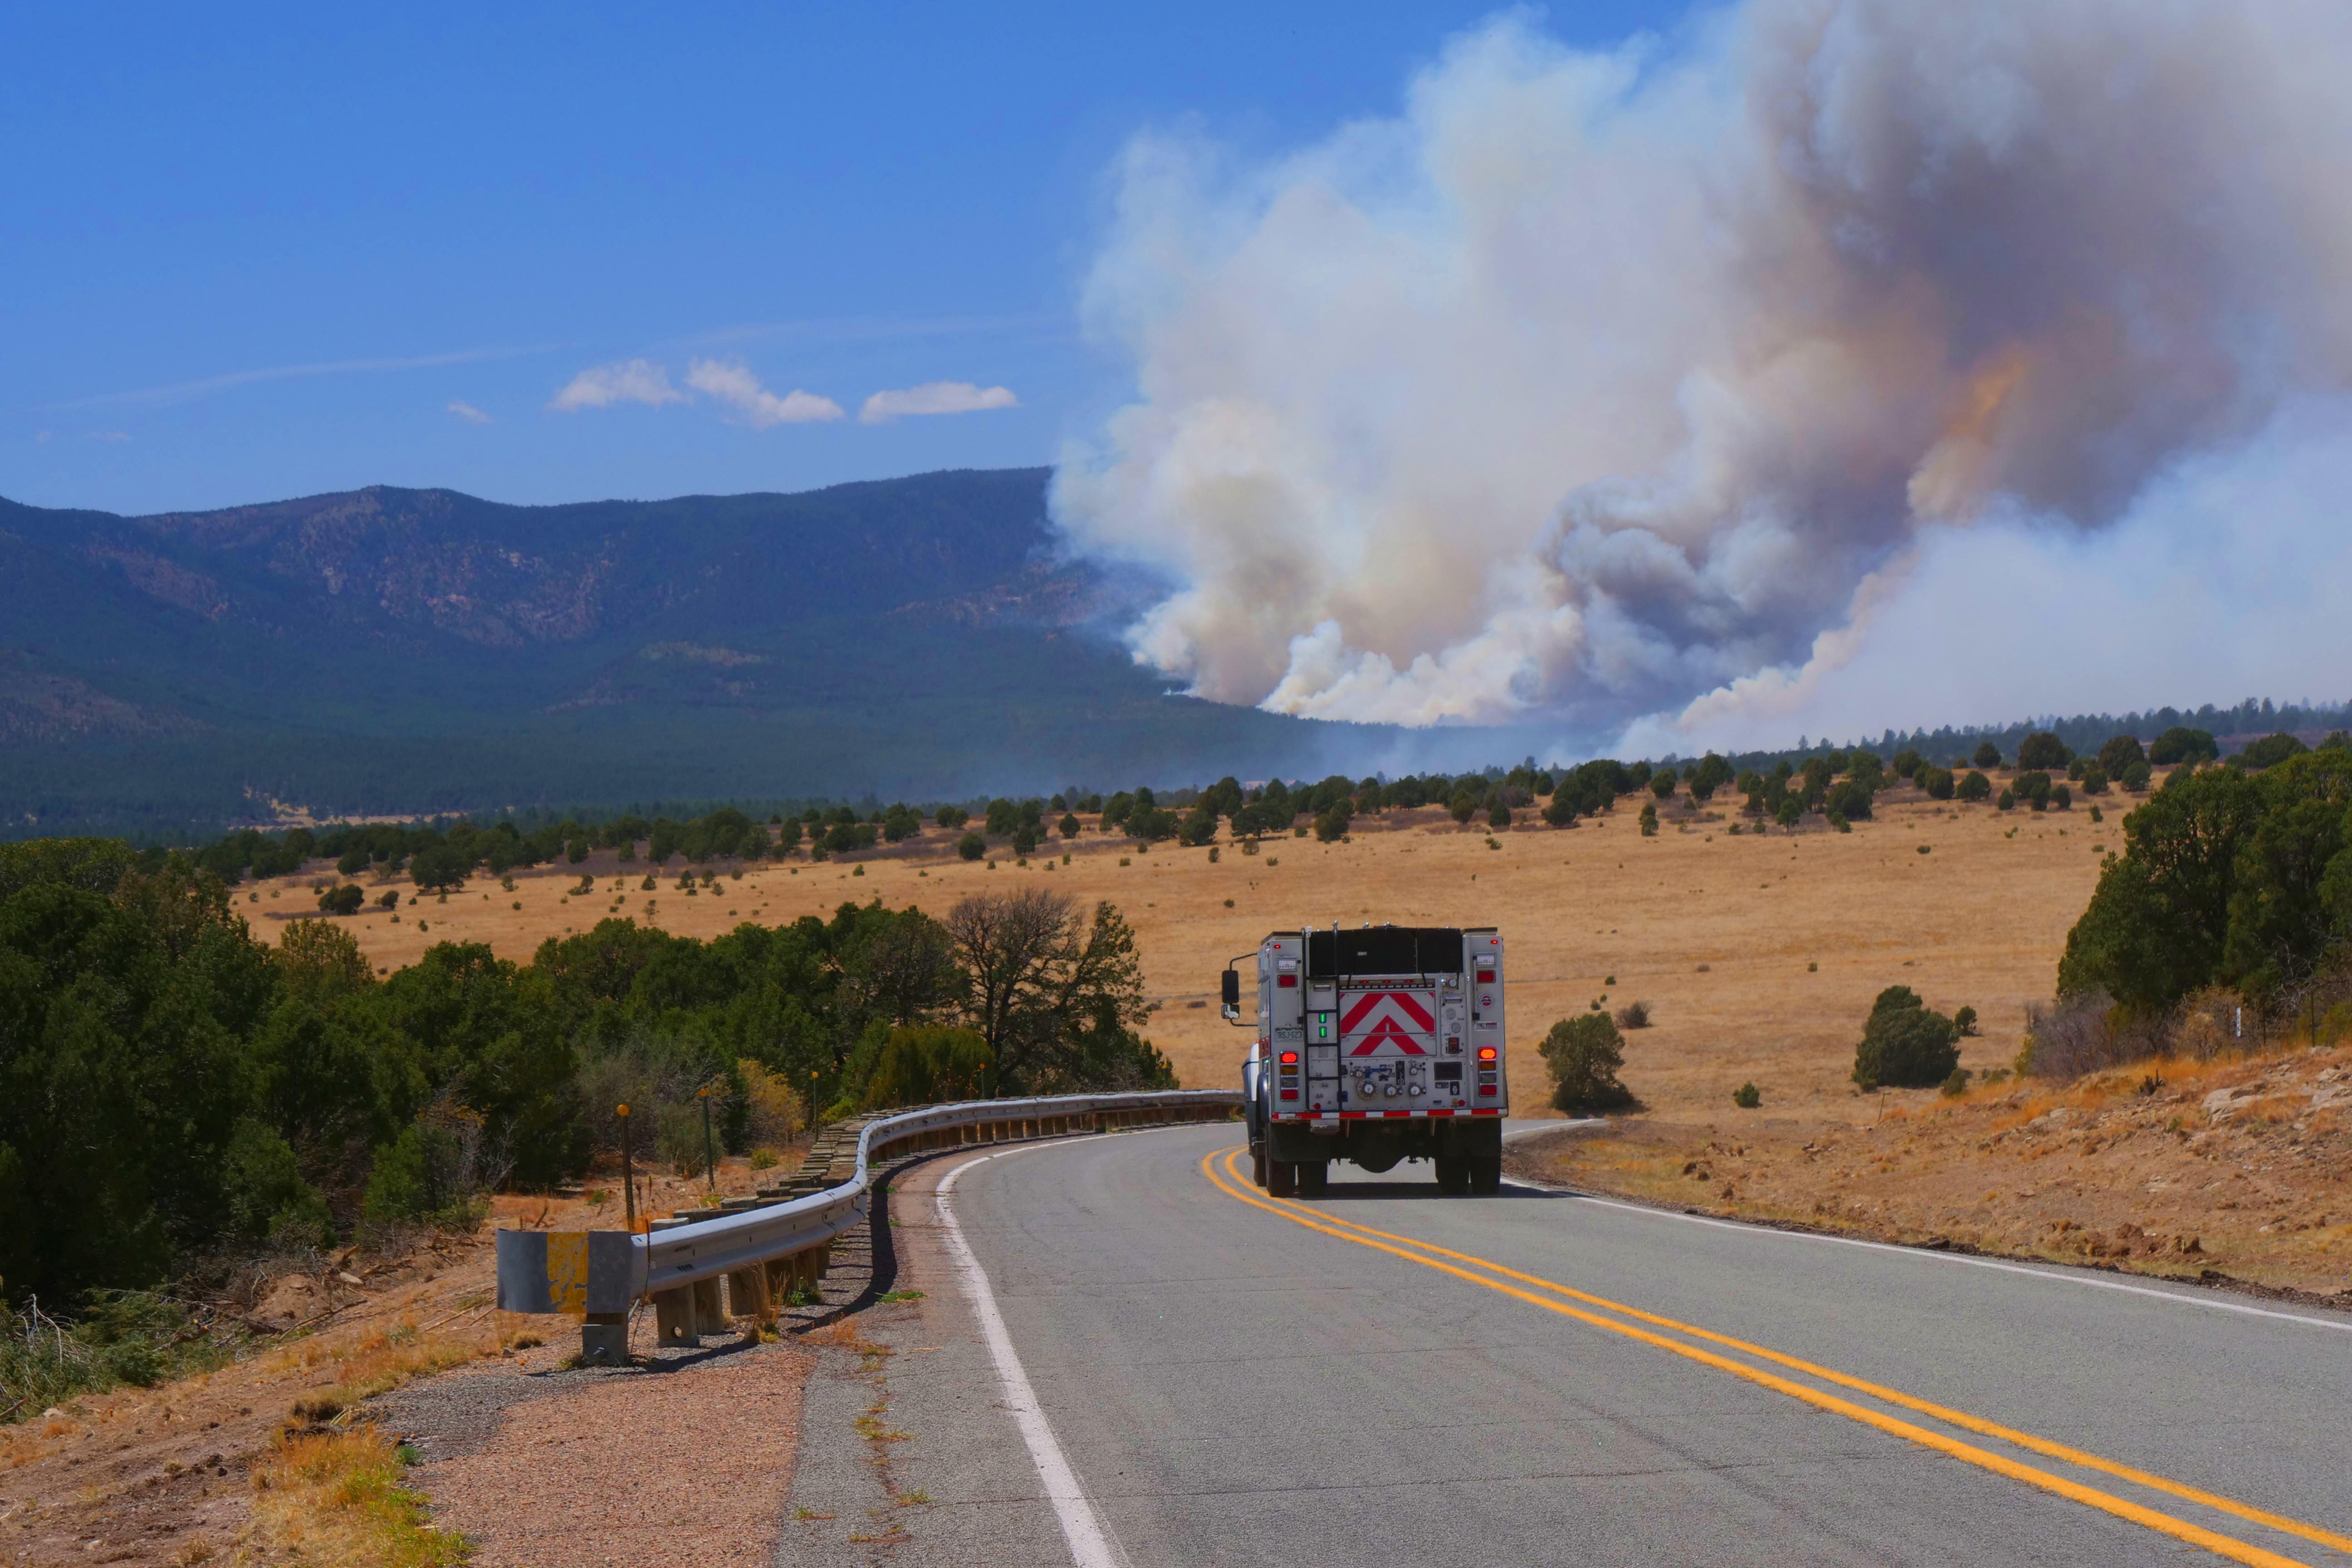 With very strong winds on May 8, fire activity increased dramatically on the southwest portion of the fire. This photo looks toward the northwest from Highway 283, west of Las Vegas, NM.